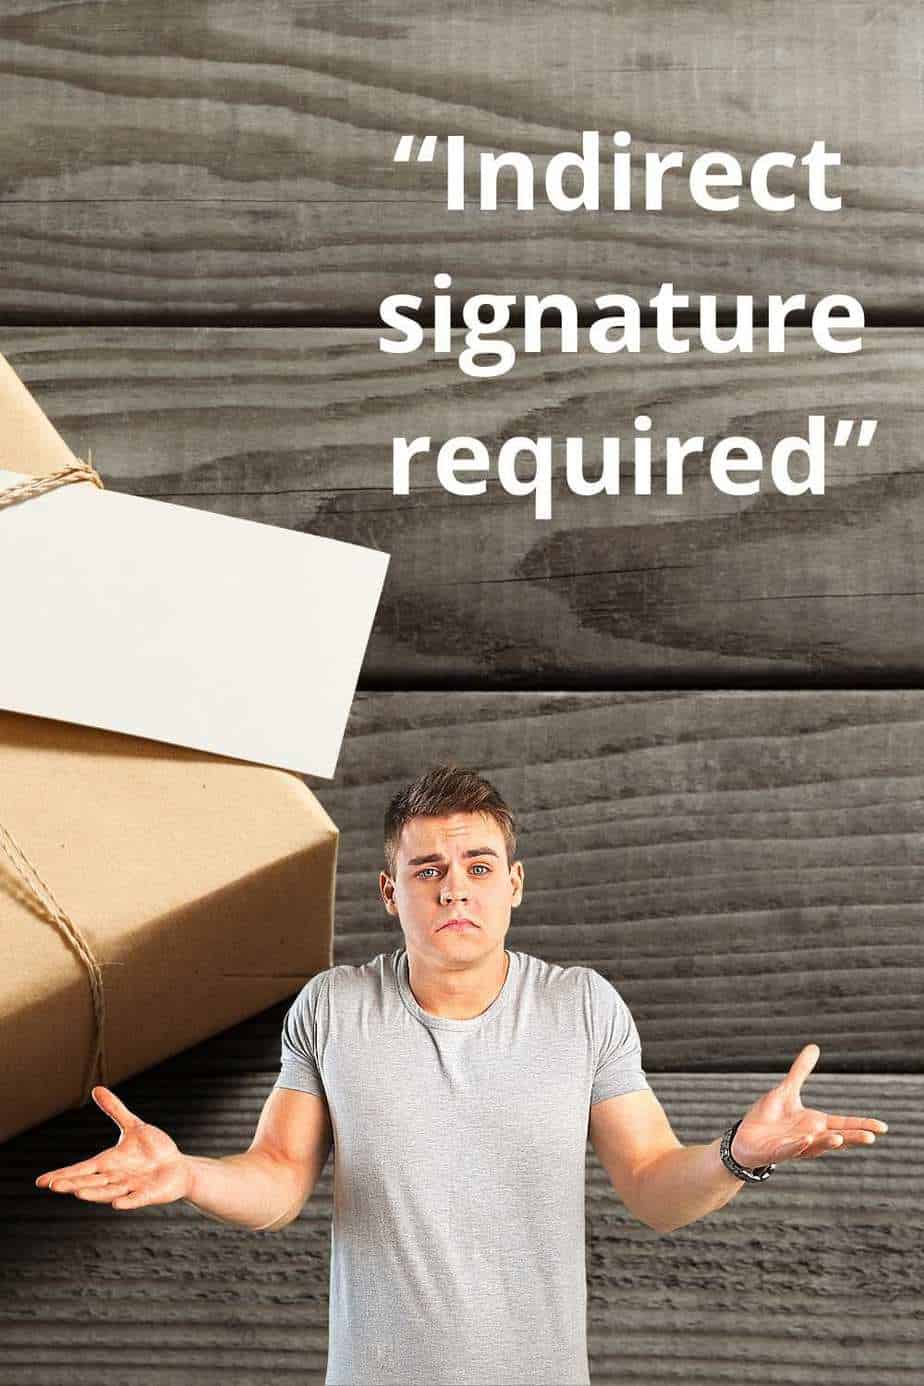 Indirect Signature Required Meaning Update